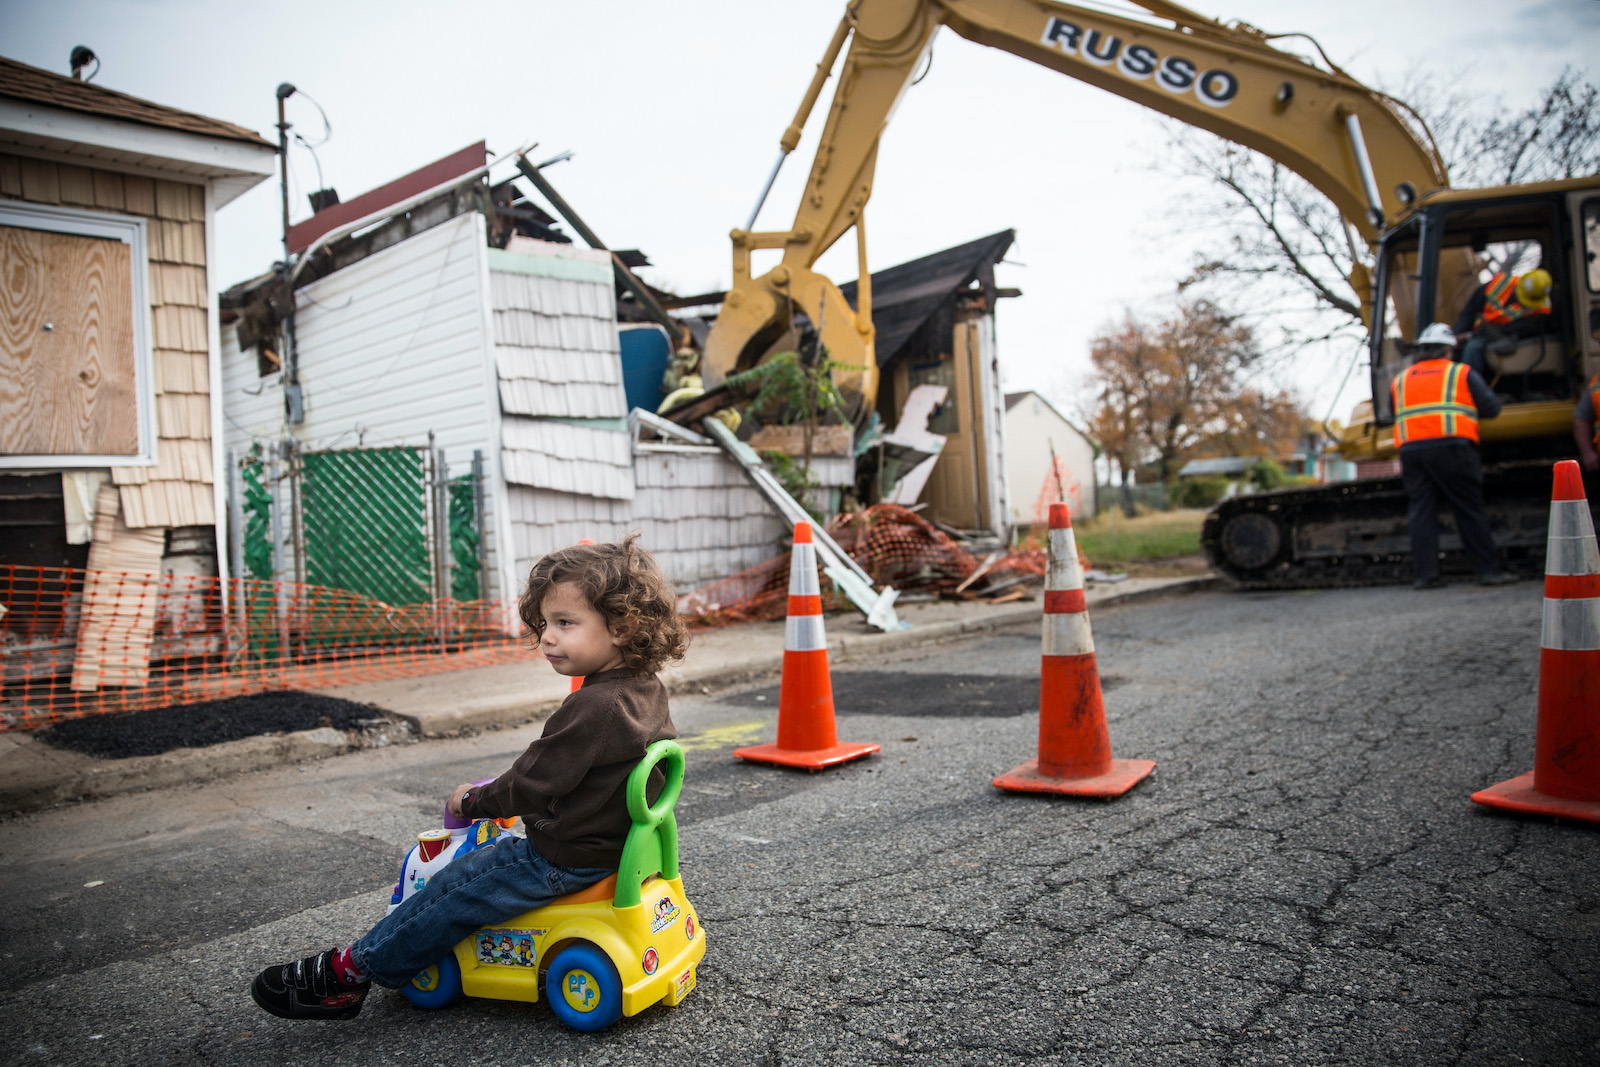 a child in a toy car plays on a street. IN the background, an excavator takes apart a damaged house